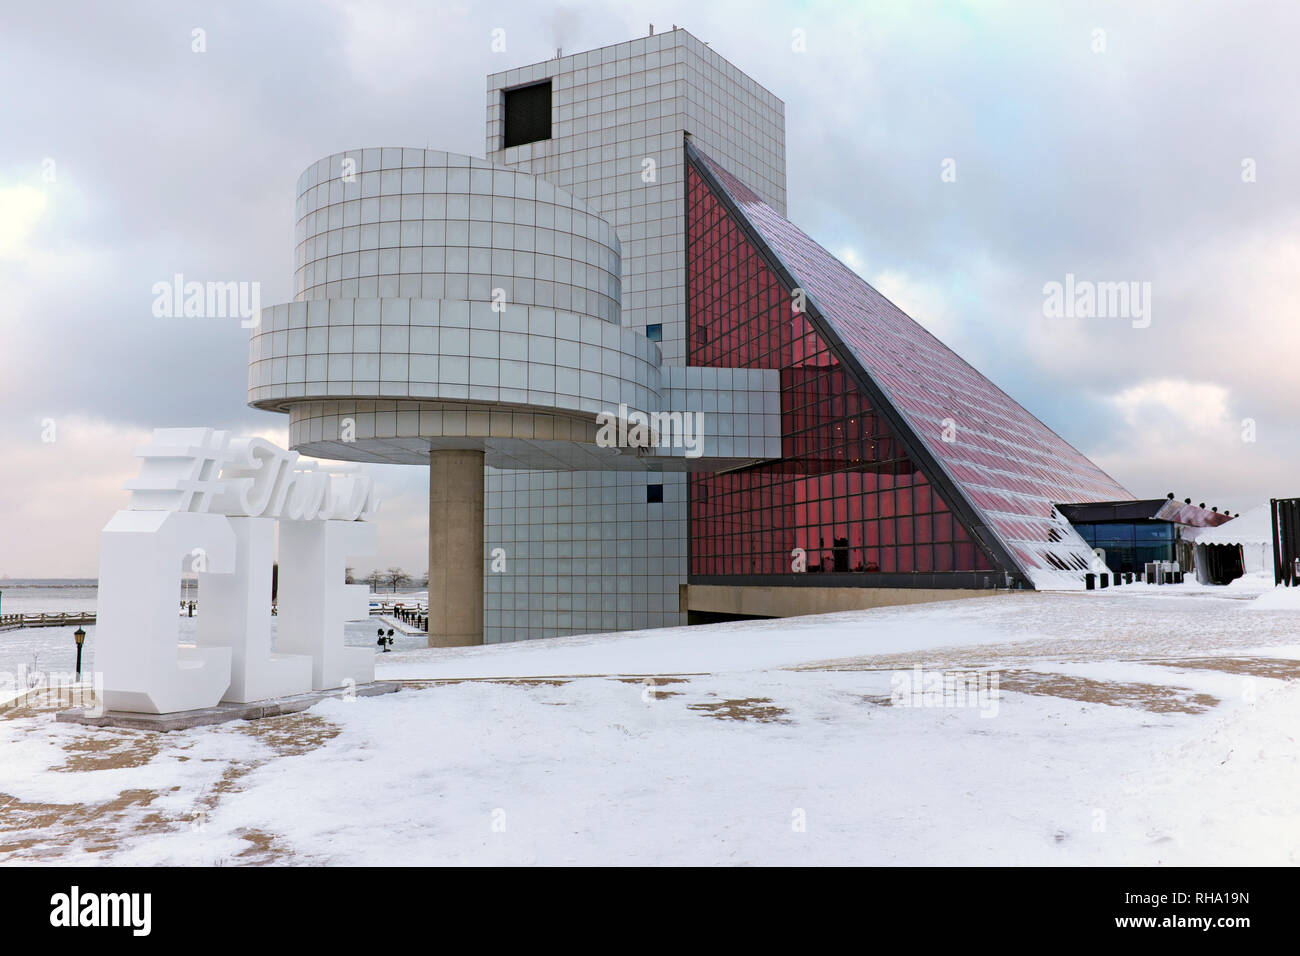 The Northcoast Harbor winter weather in Cleveland Ohio brings snow to the Rock and Roll Hall of Fame and Museum, a major attraction on the lakefront. Stock Photo